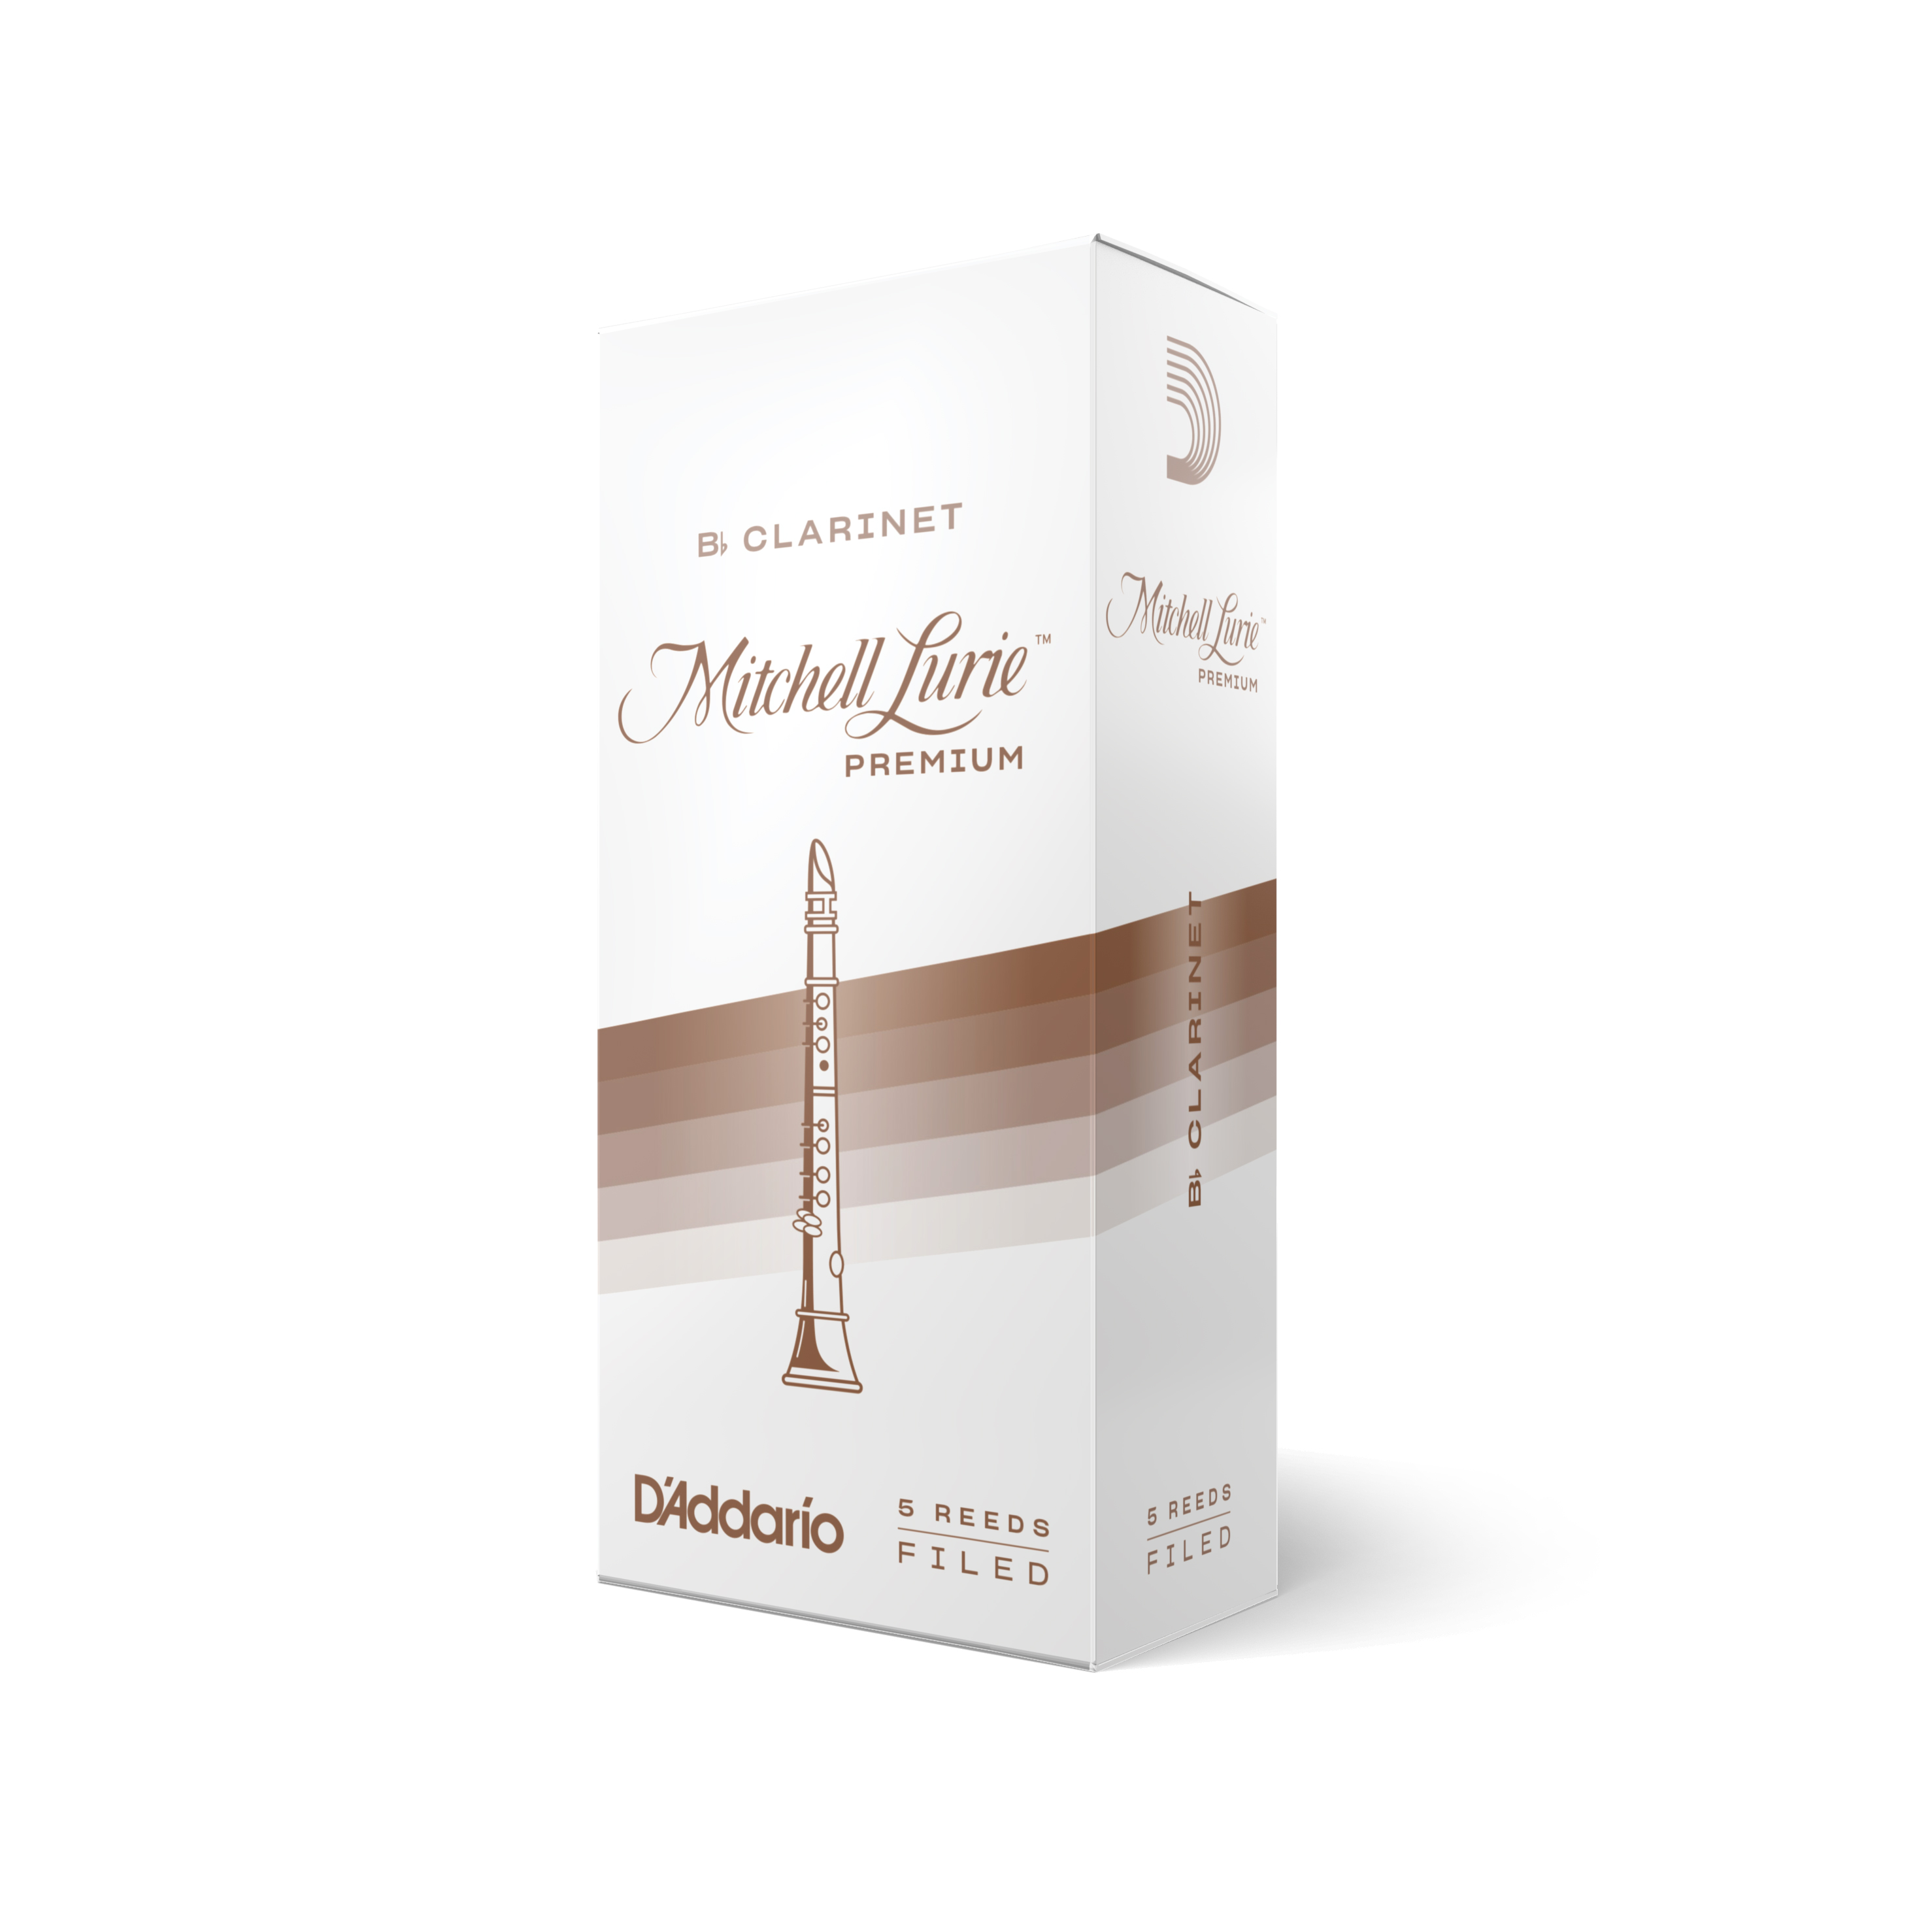 White with Brown box of five Mitchell Lurie Premium B Flat clarinet reeds, strength three and a half